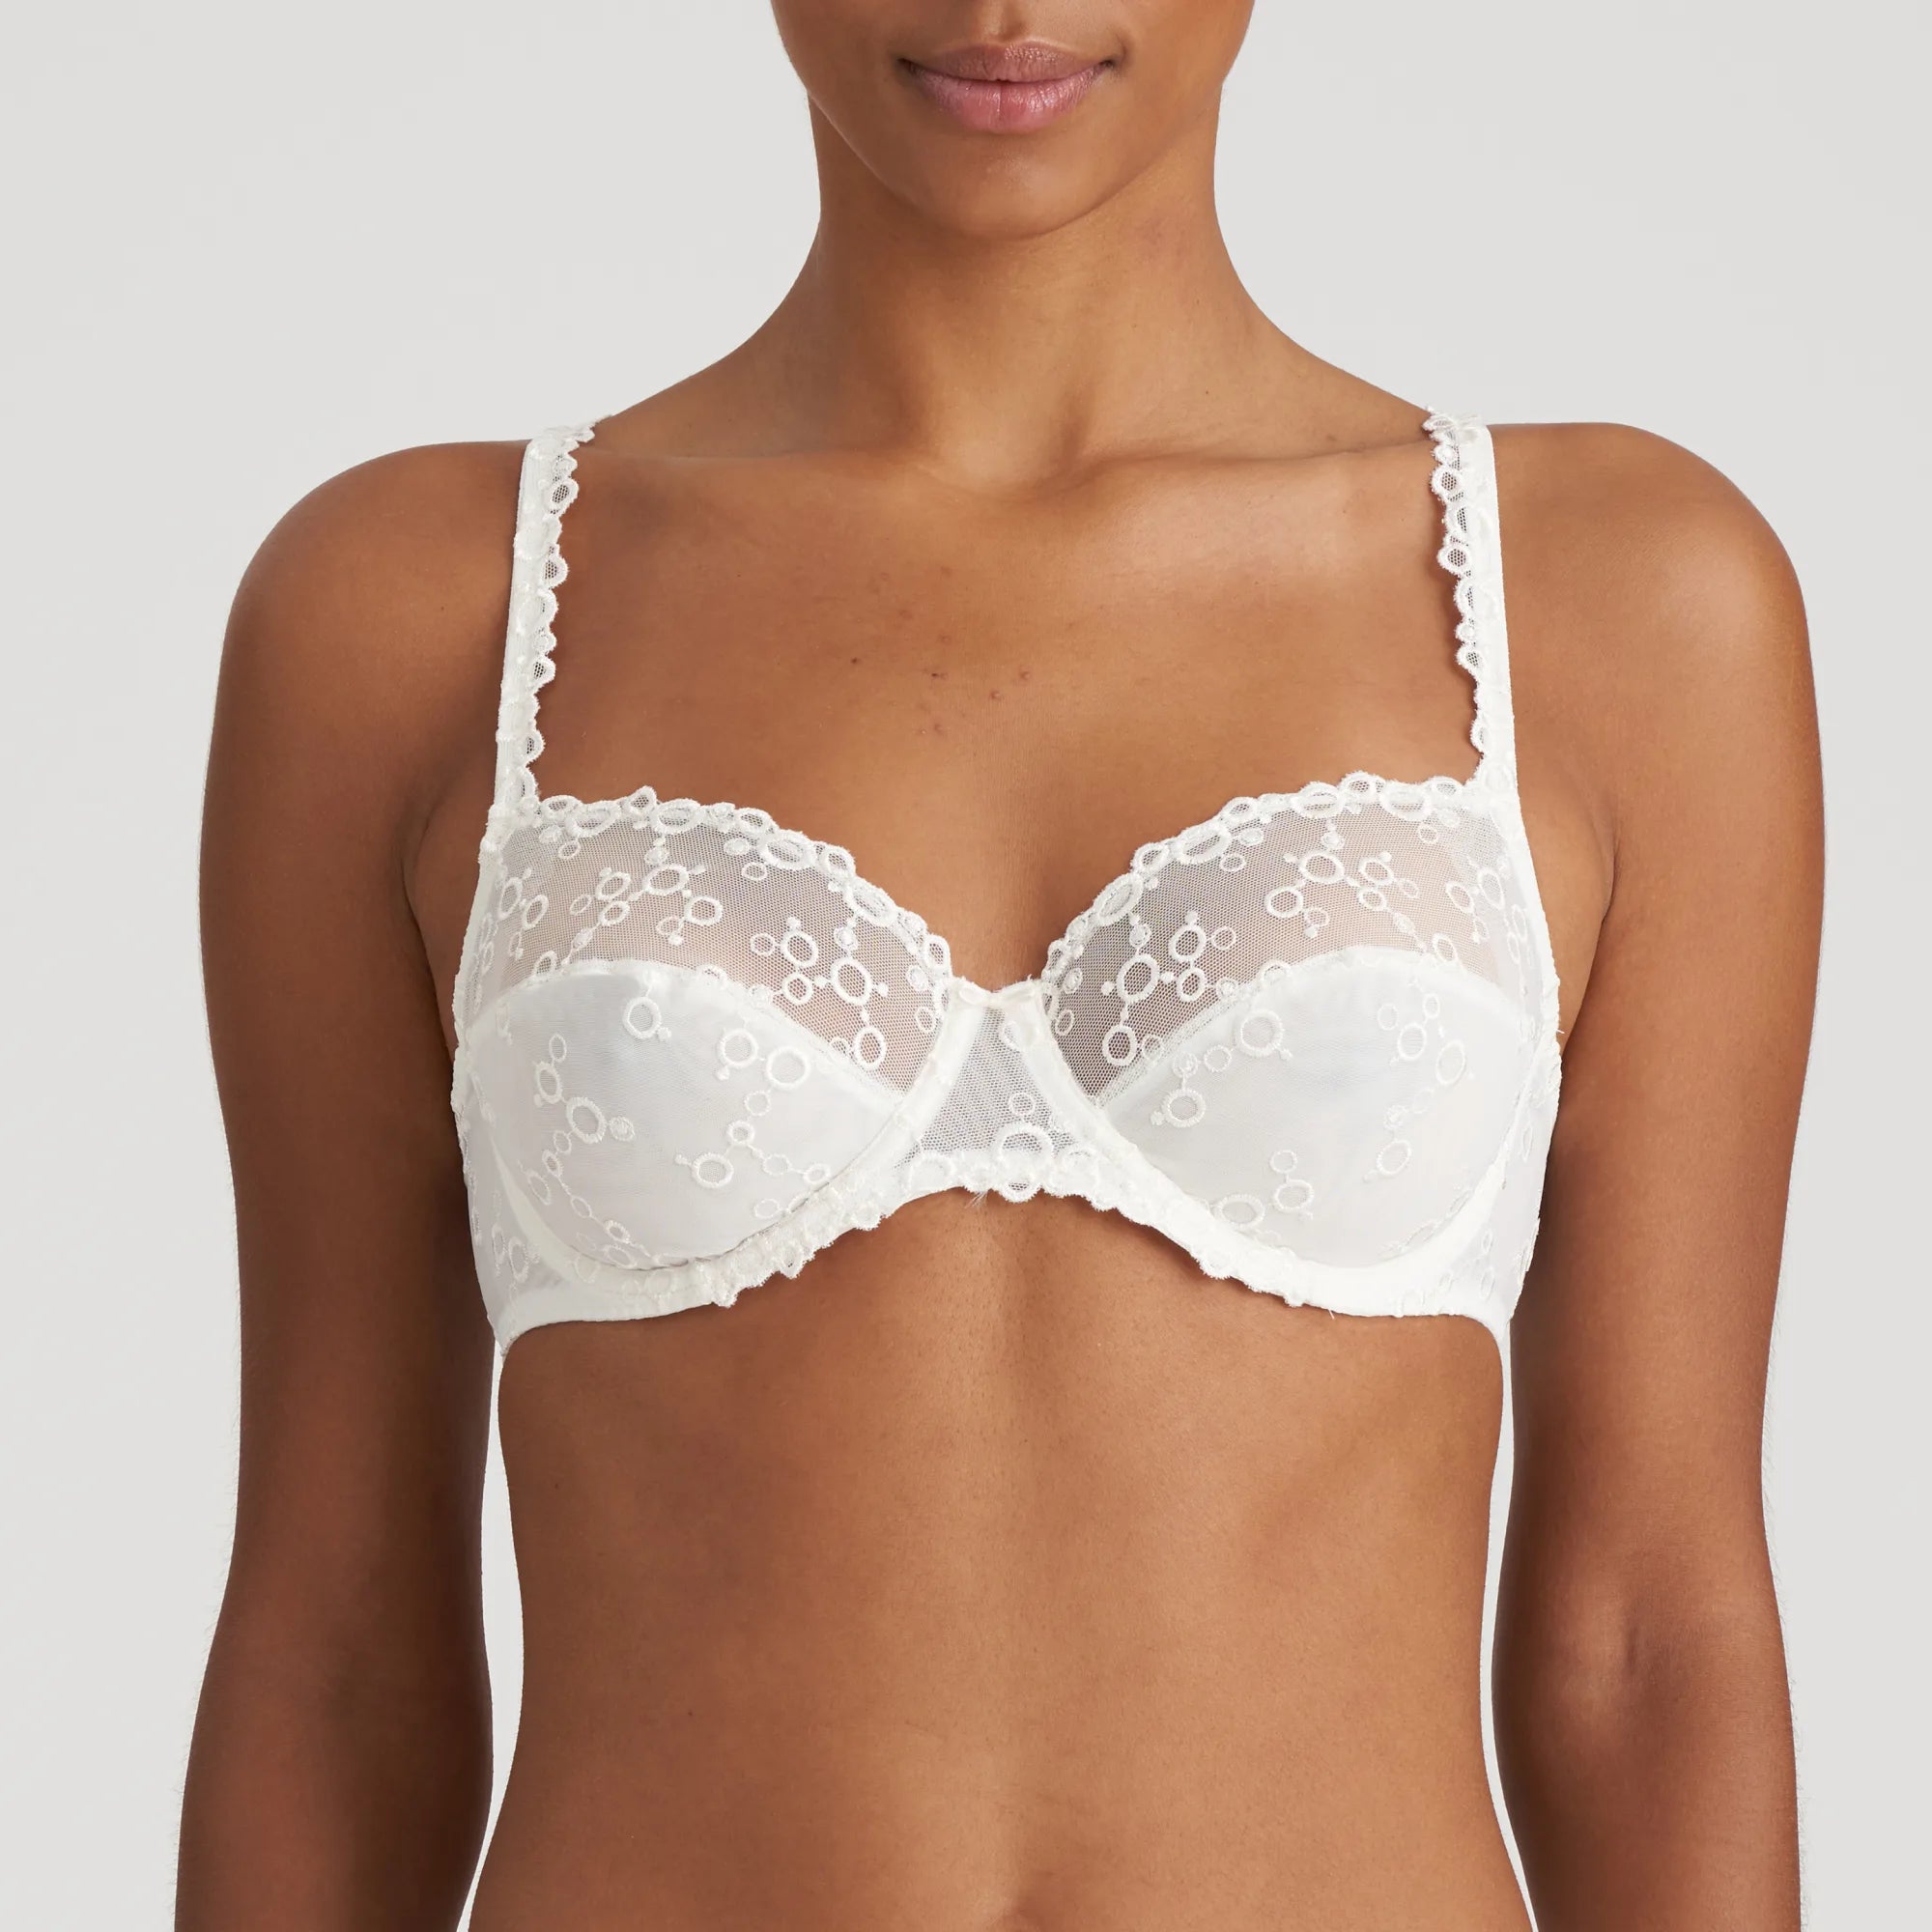 Womens Under Wired Bra Full Cup Lace Detail By Marlon Size UK 34